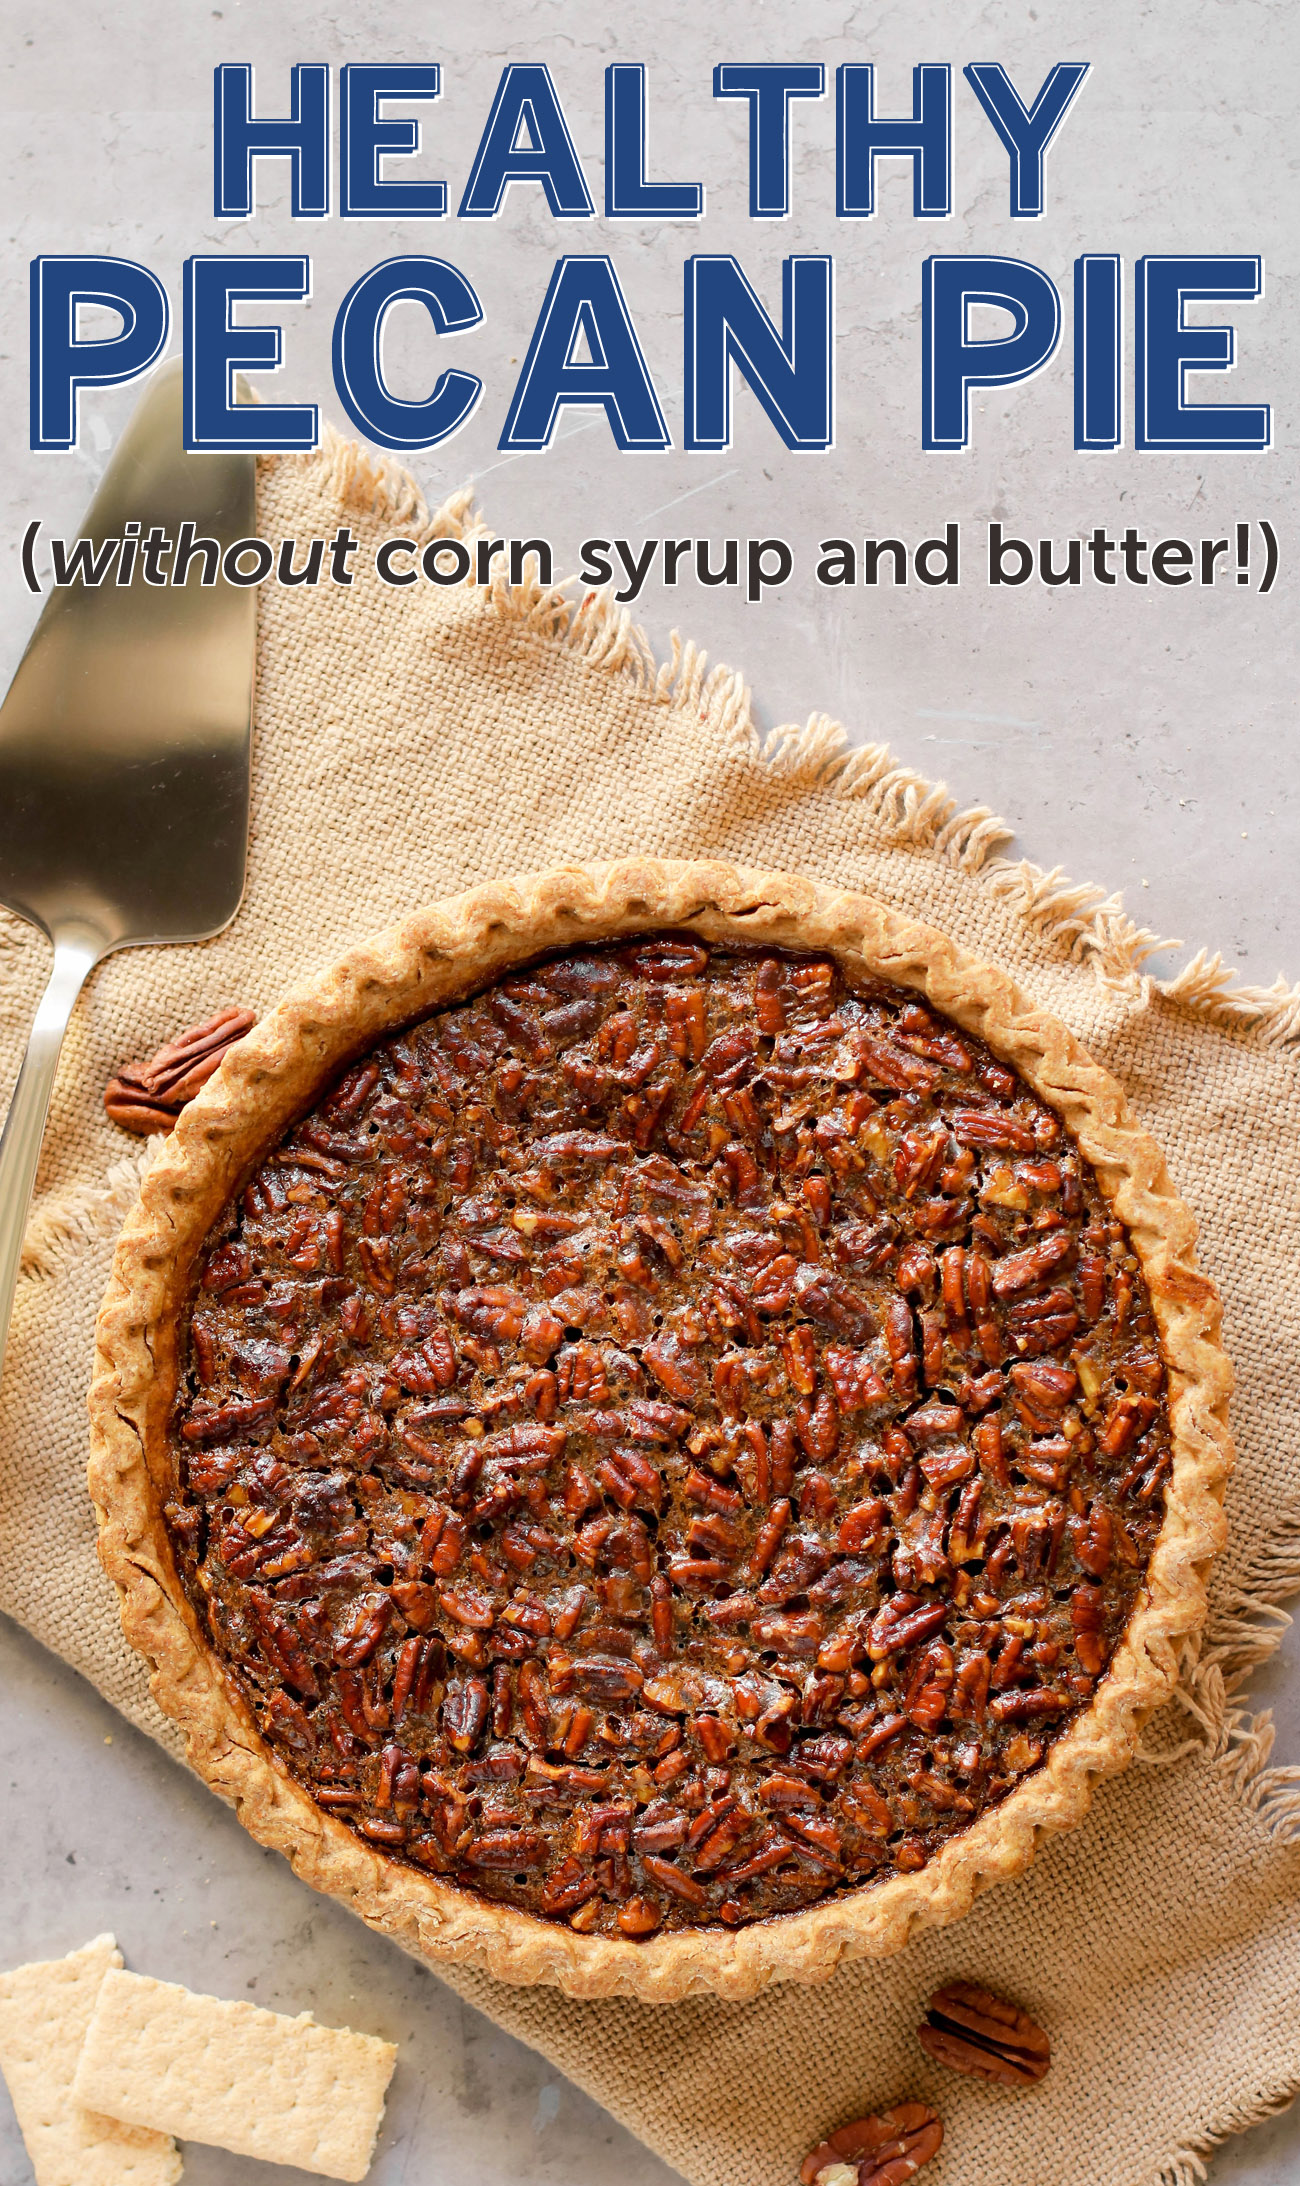 This Healthy Pecan Pie is so rich and decadent, every bite is pure joy -- you'd never know it's made without the corn syrup, white sugar, butter, and heavy cream! This freezer friendly Pecan Pie is an all natural, good-for-you dessert that is perfect for Thanksgiving, Christmas, birthdays, or any day for that matter!